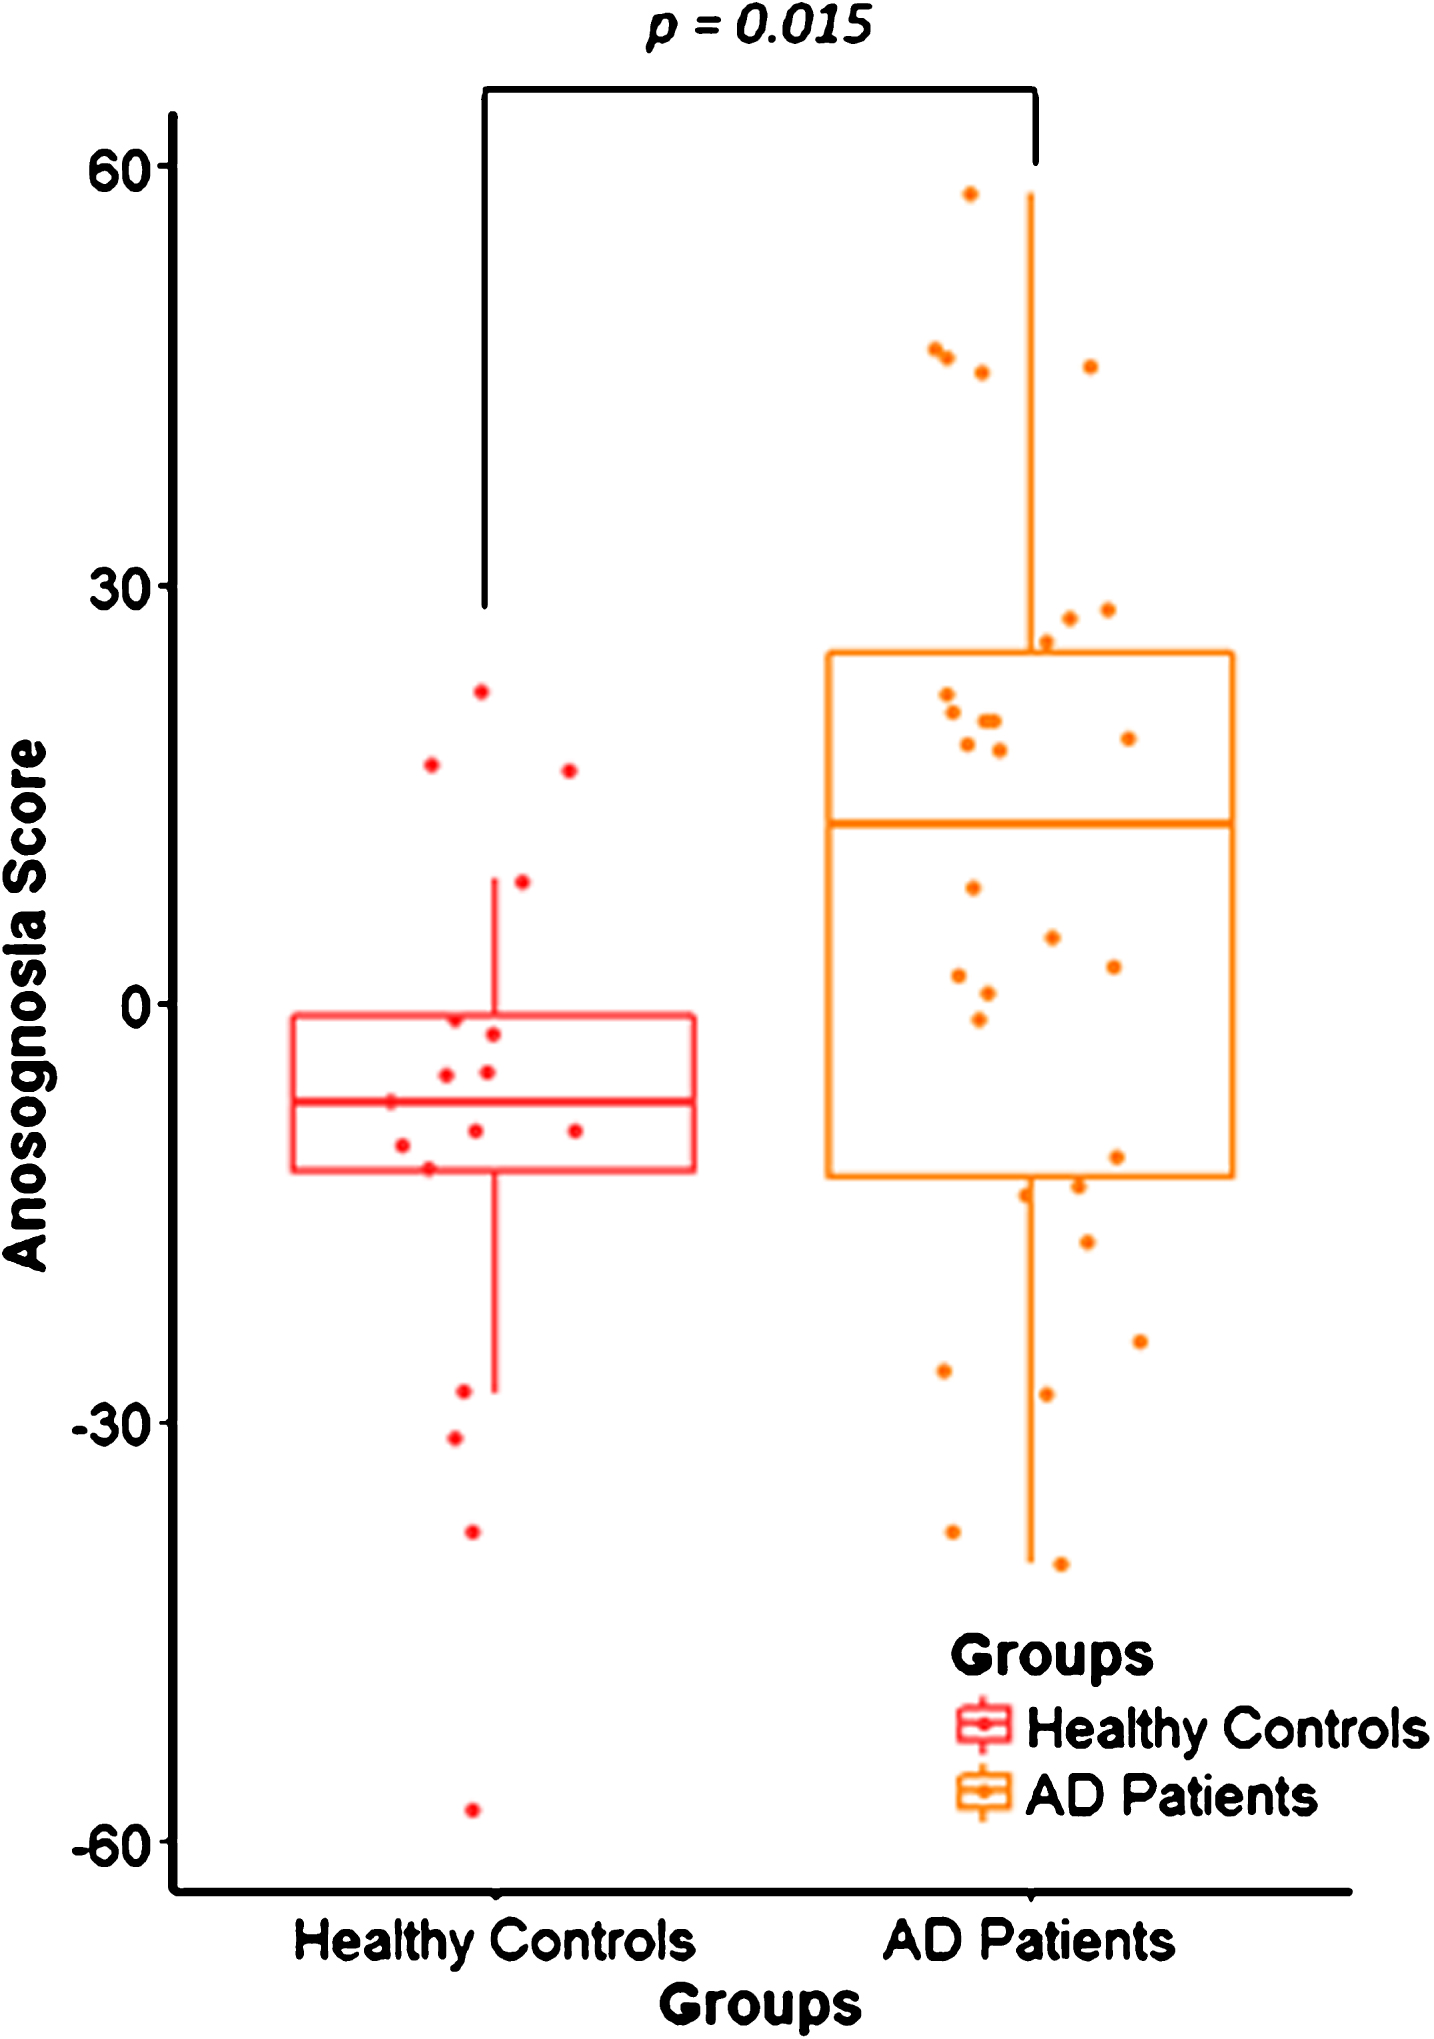 Distribution of the anosognosia score in healthy controls (HC) and Alzheimer’s disease (AD) patients. Box plot shows the difference between the anosognosia score distribution in the HC group (n = 17) in red and AD patients (n = 30) in yellow, with p = 0.015.